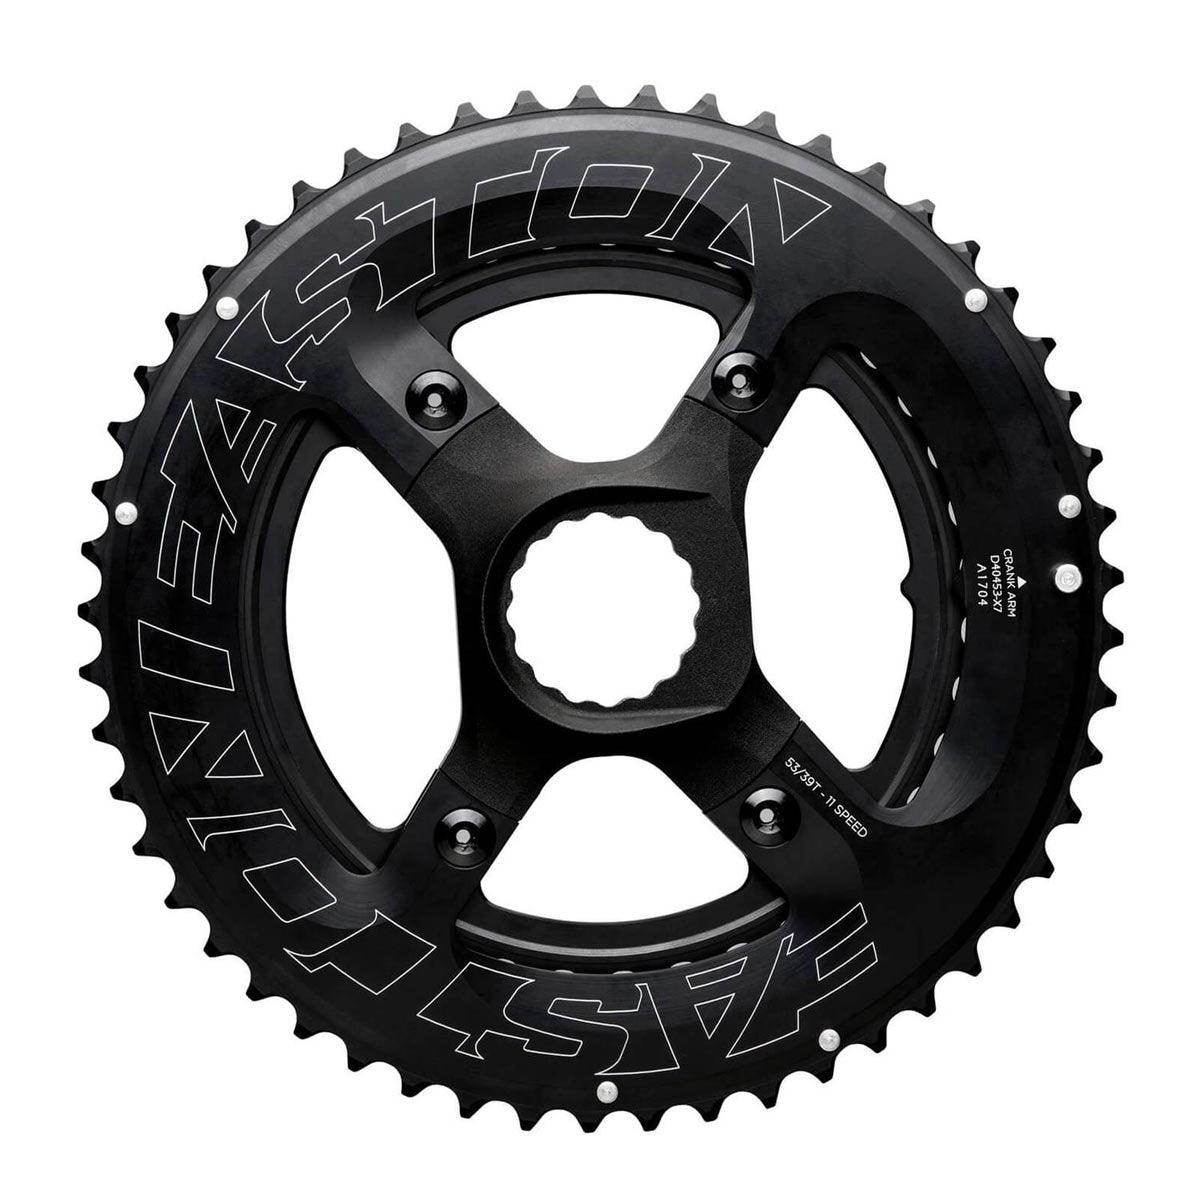 Easton Easton Direct Mount Spider/ Chainrings 53/39t